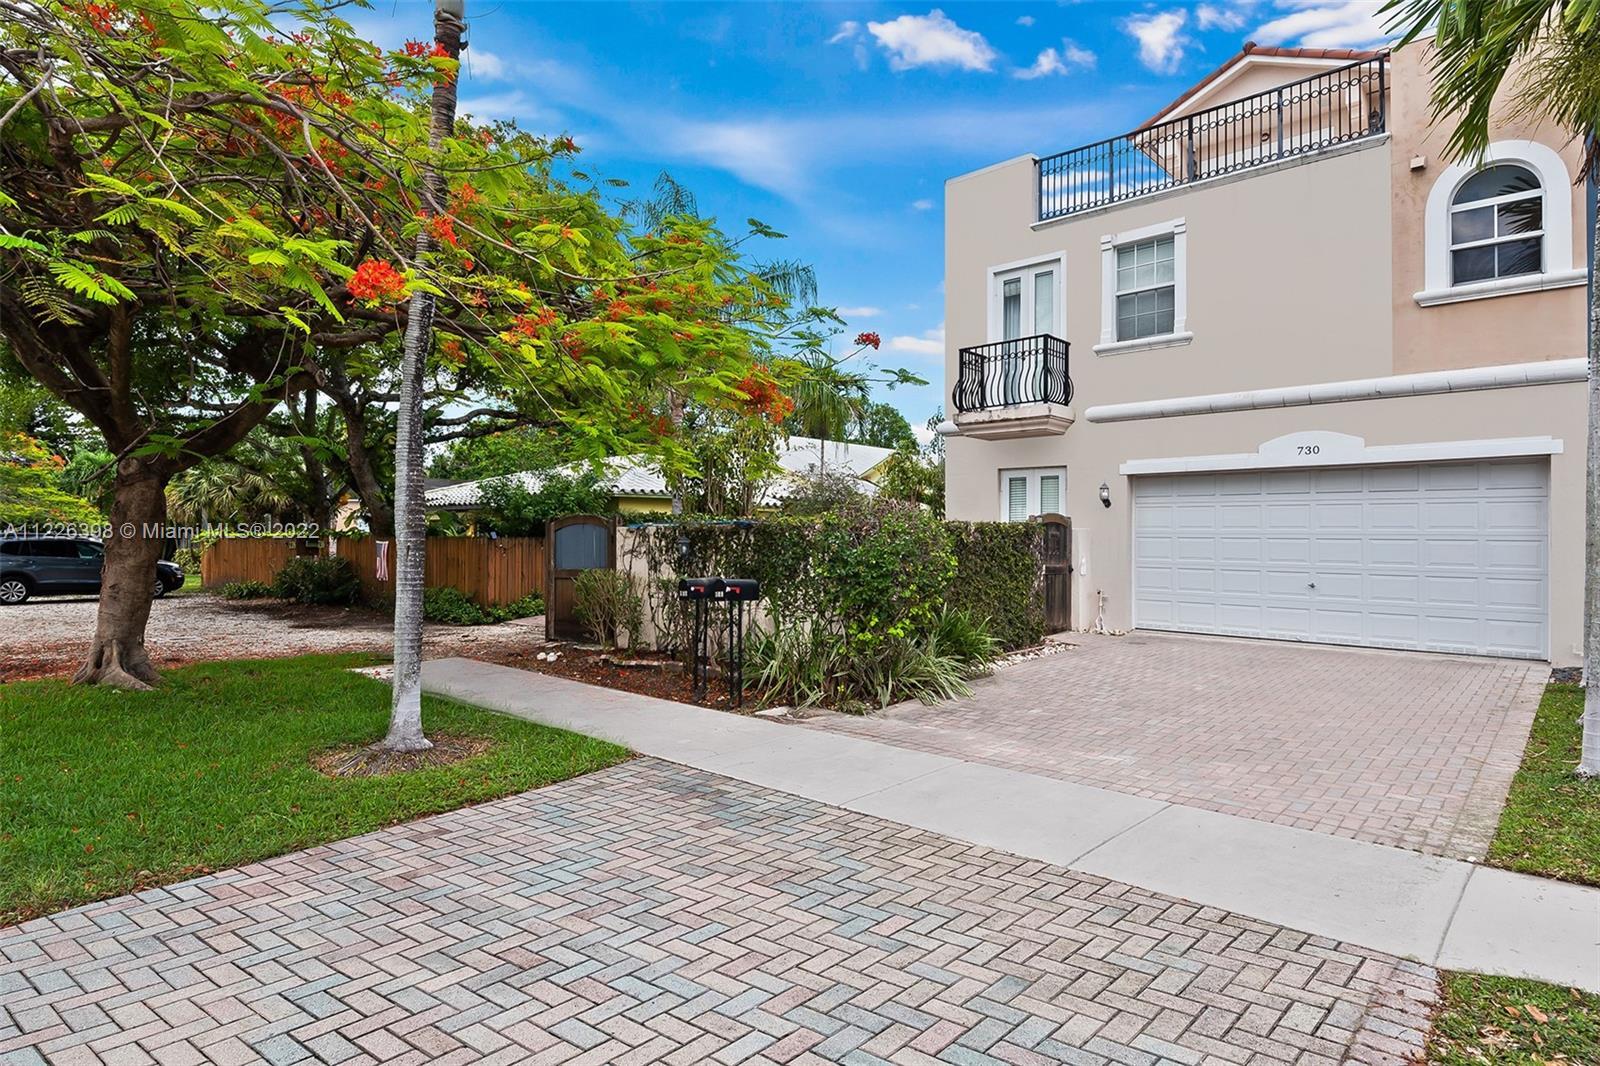 VICTORIA PARK*2 CAR GARAGE 3 LEVEL TOWNHOME LOCATED IN DOWNTOWN FORT LAUDERDALE*EXPANSIVE VIEWS FROM